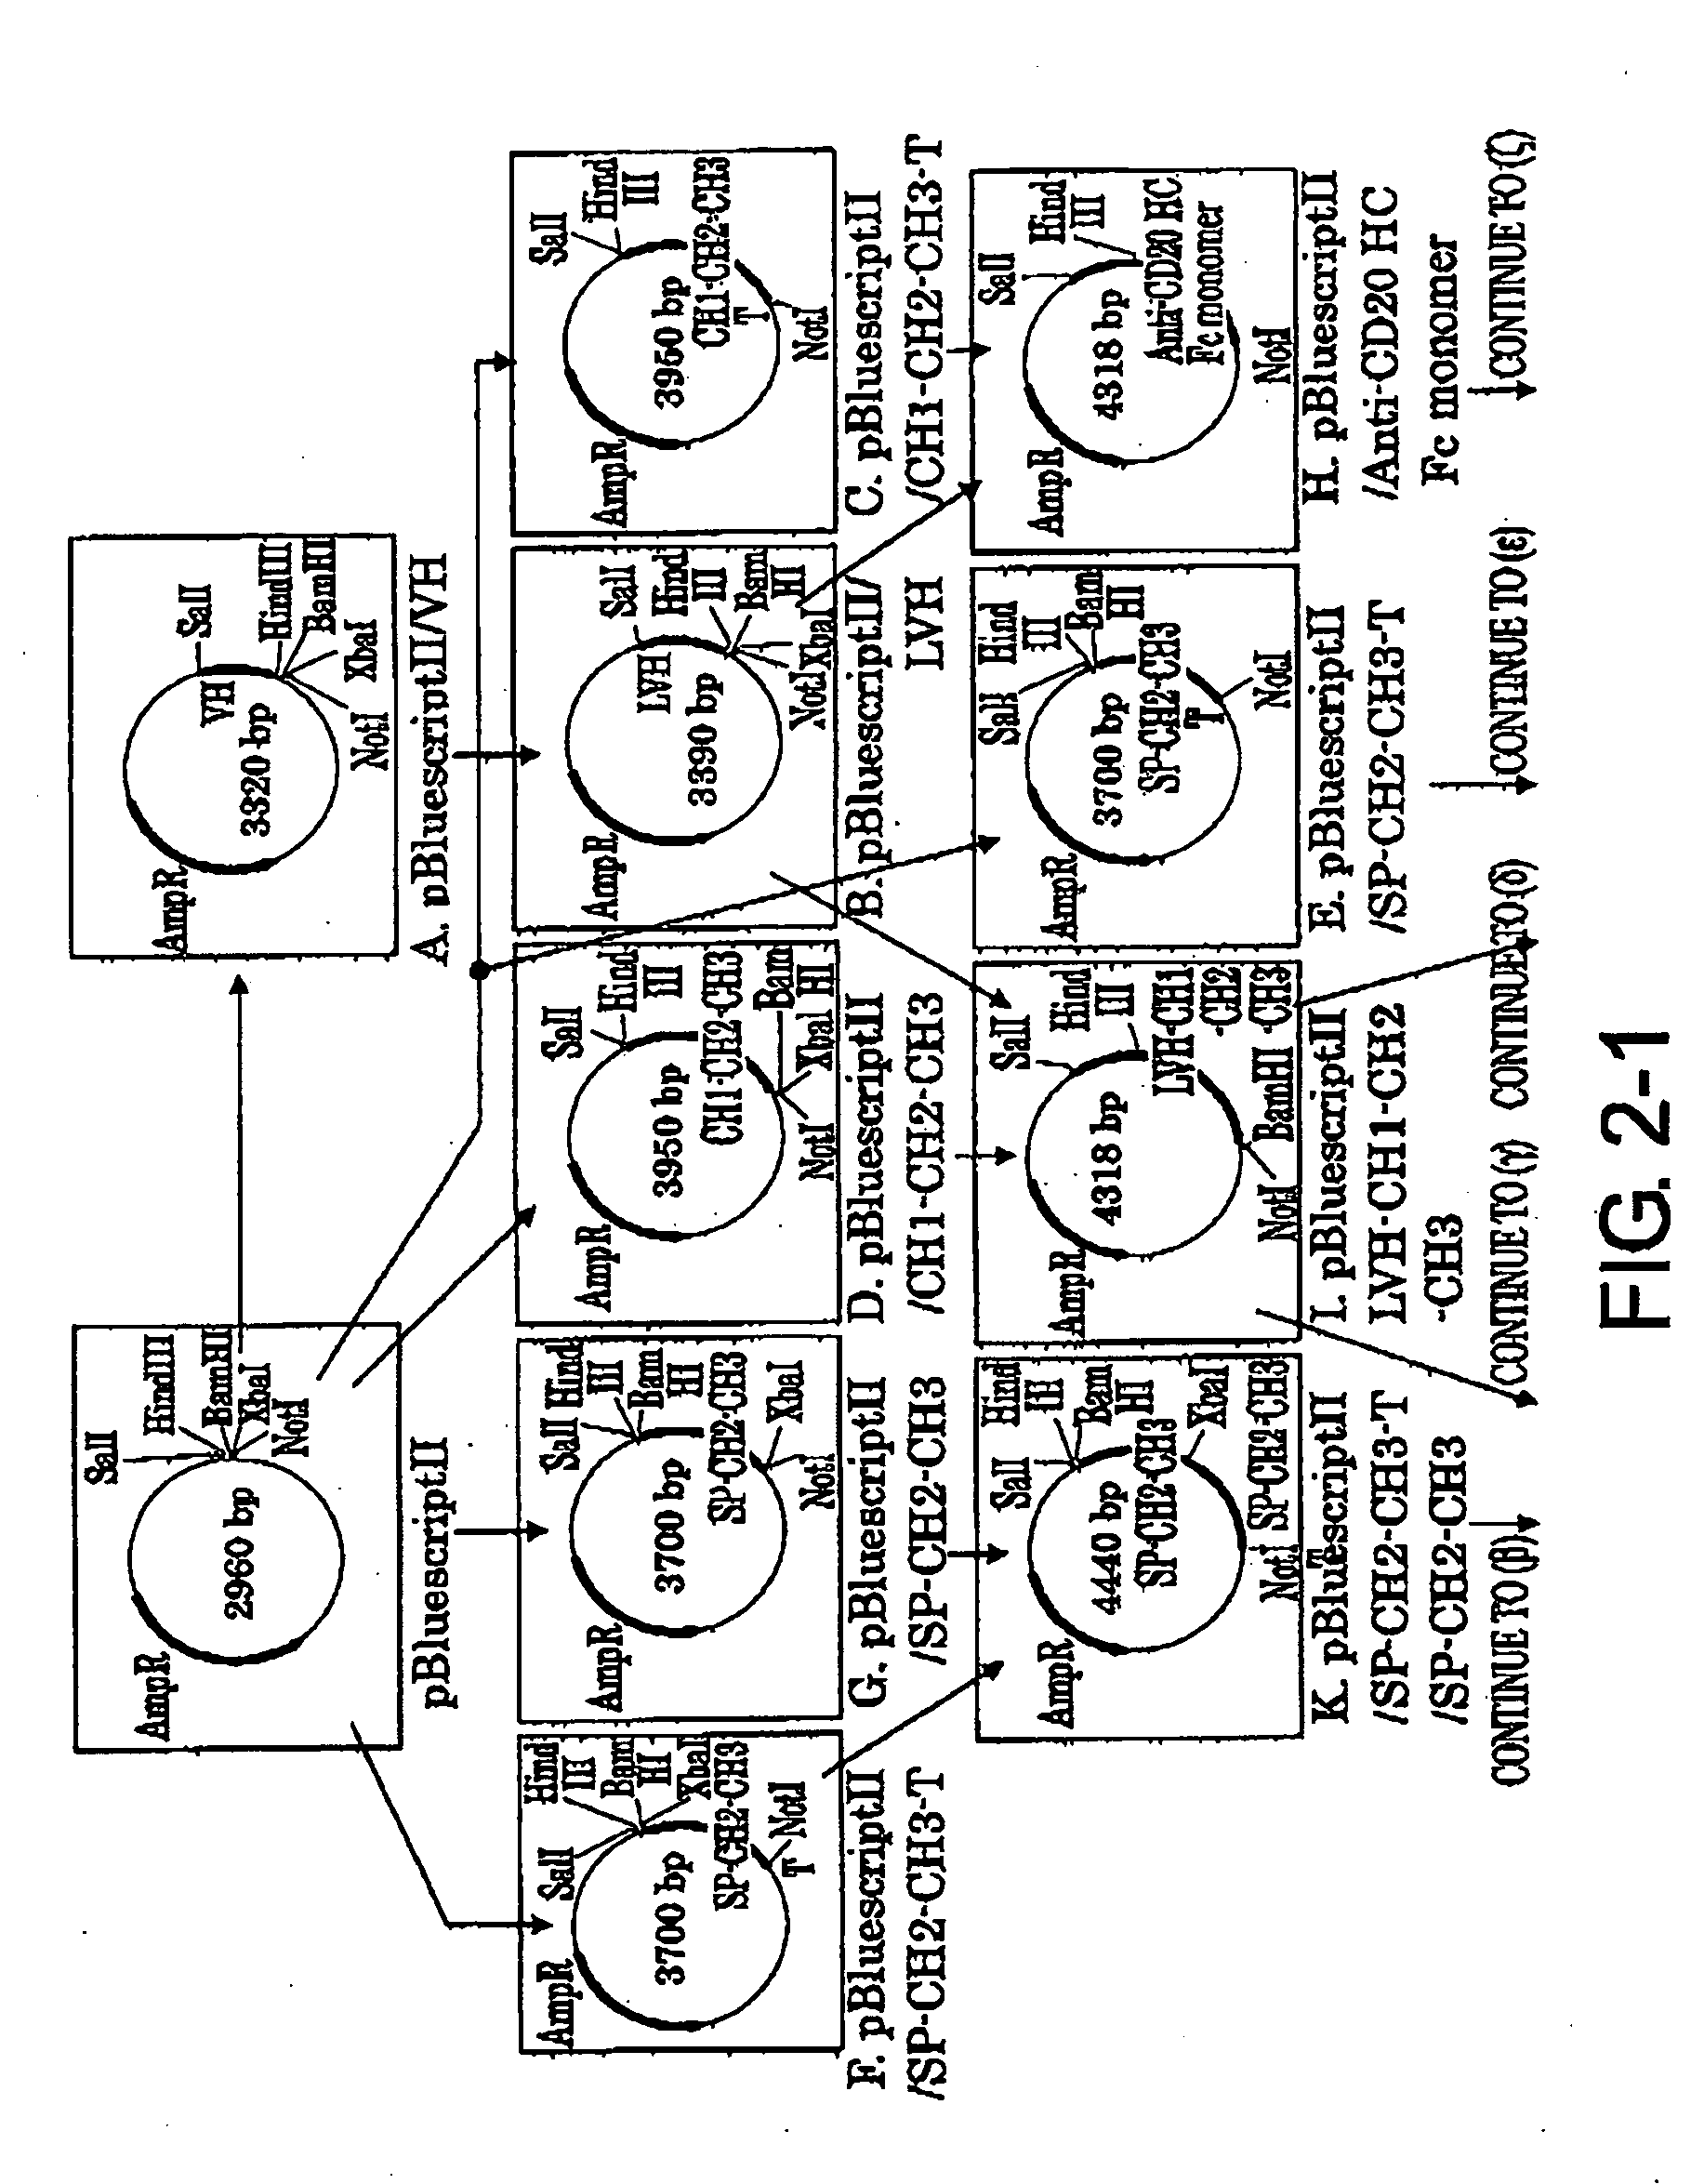 Modified antibodies with enhanced biological activities